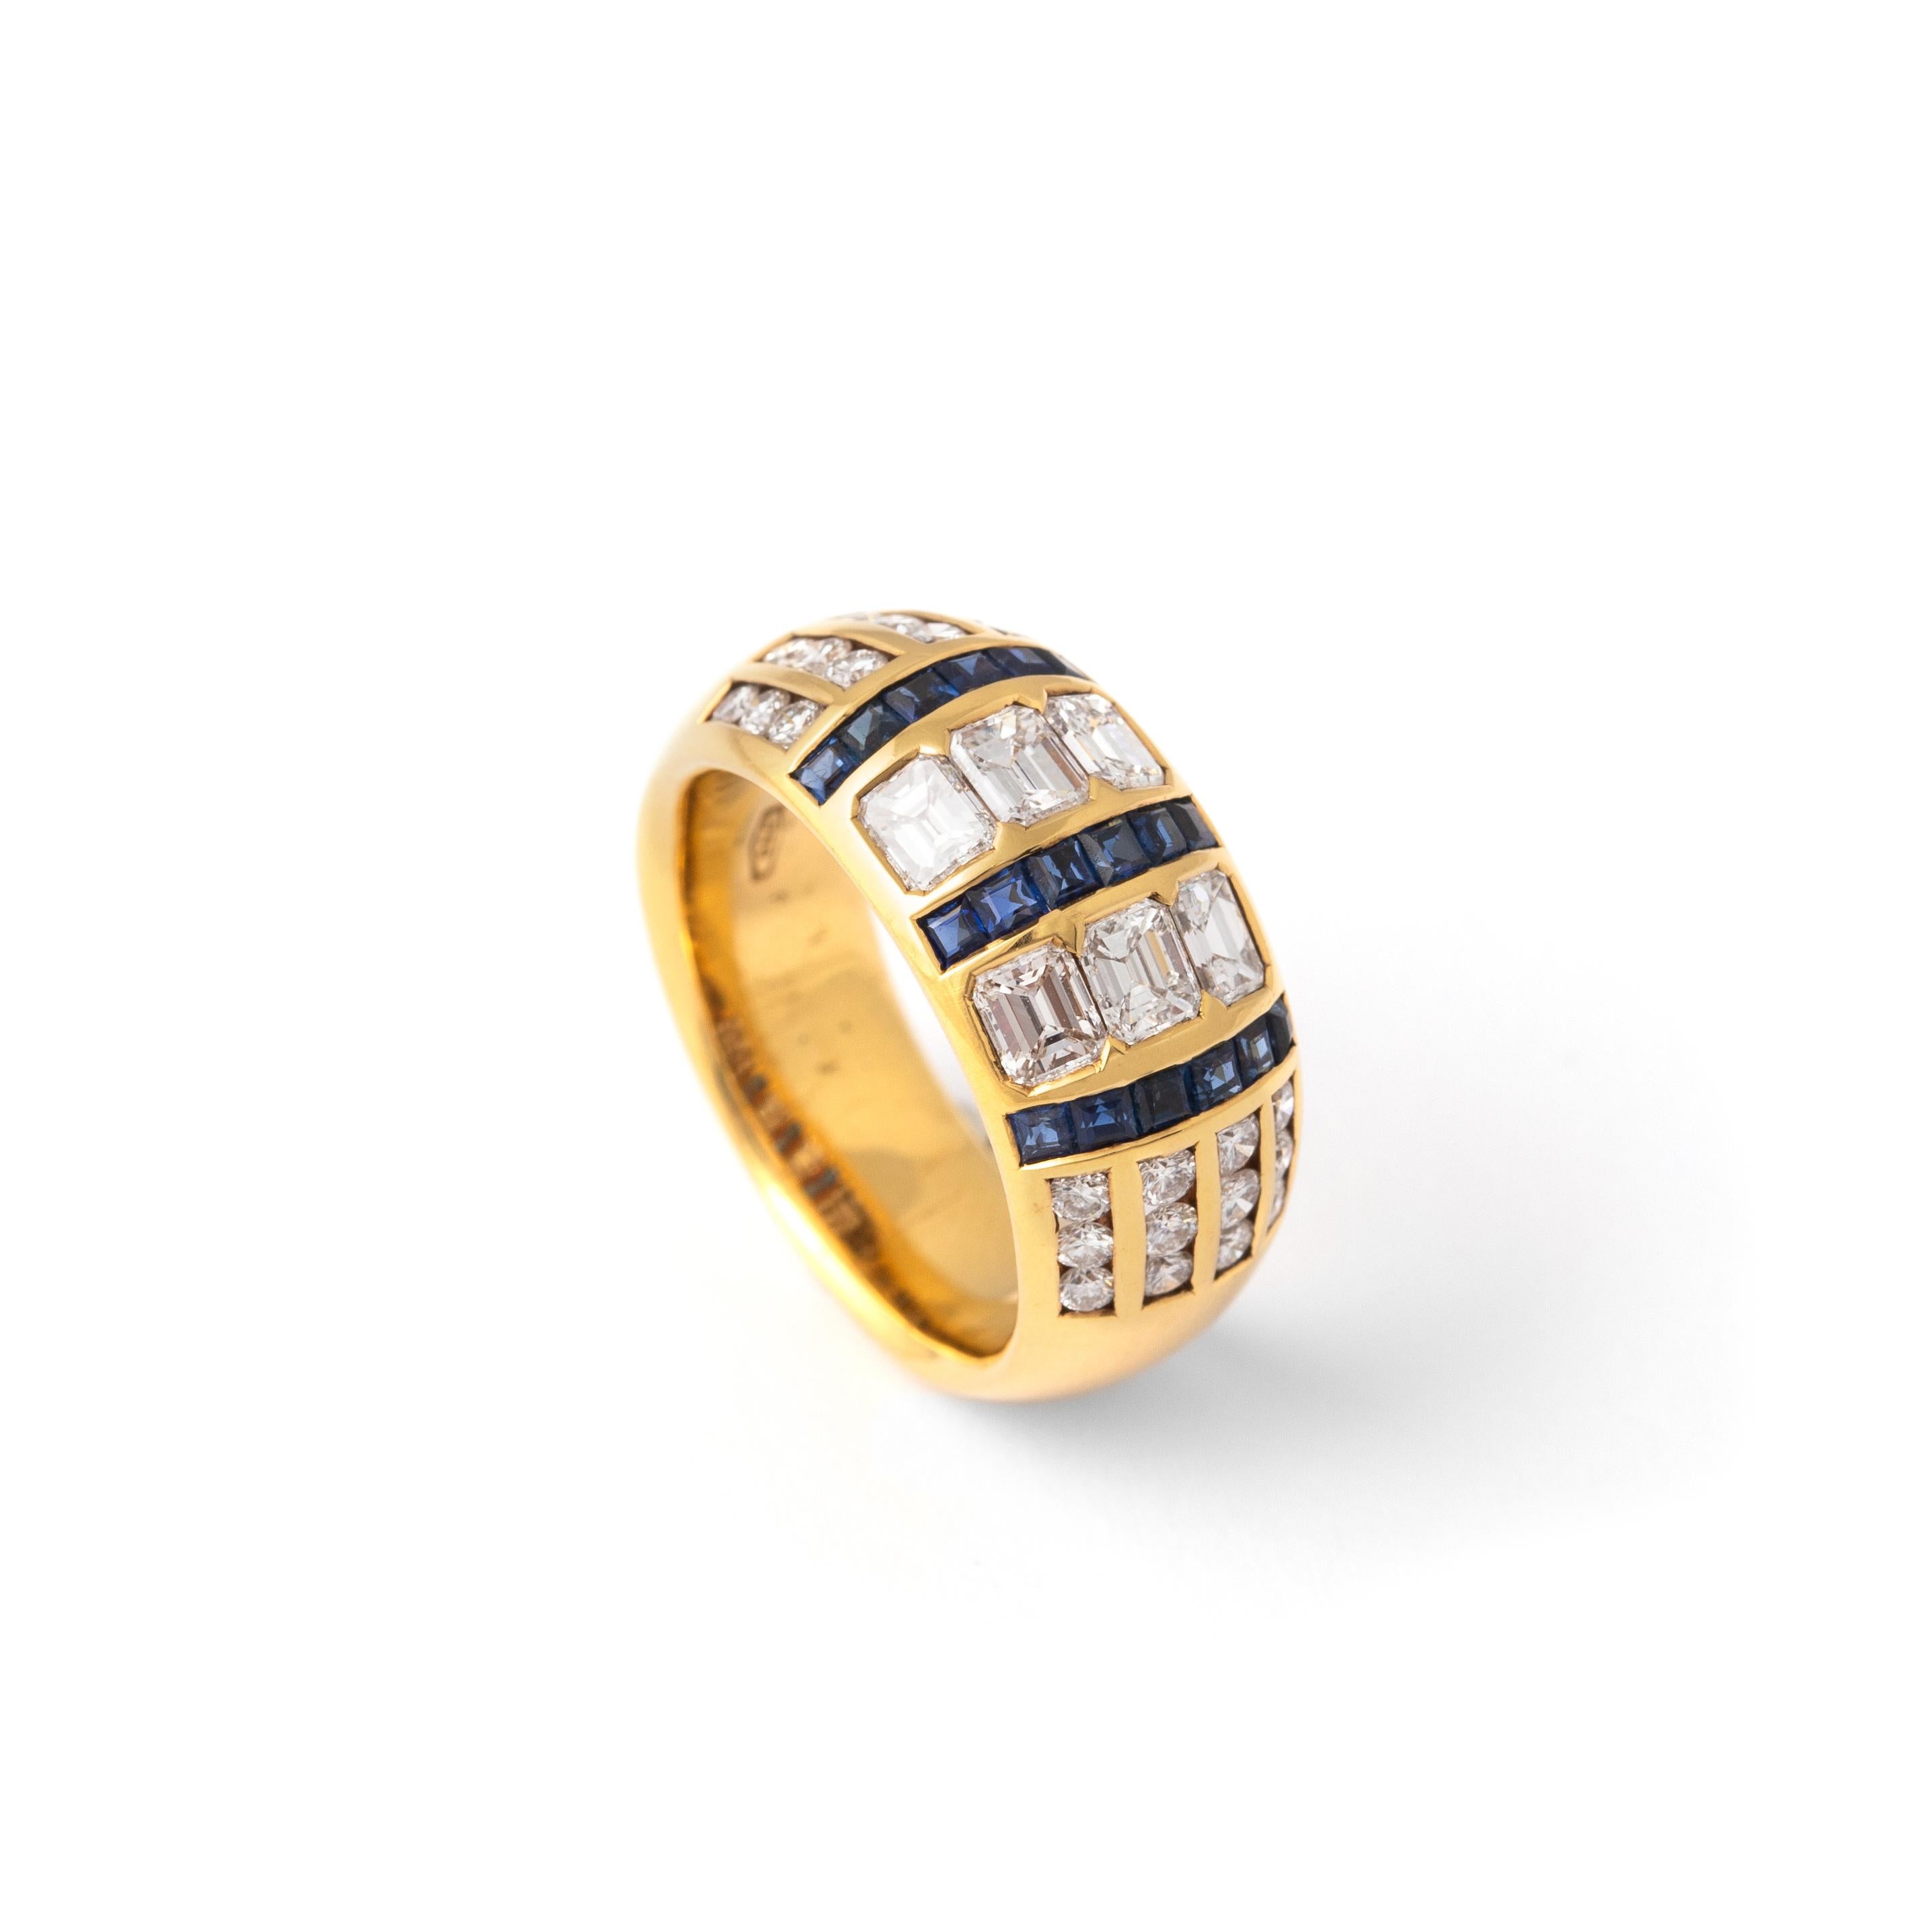 Sapphire and Diamond Yellow Gold 18K Ring.

Size: 5.25
Total weight: 9.57 grams.
